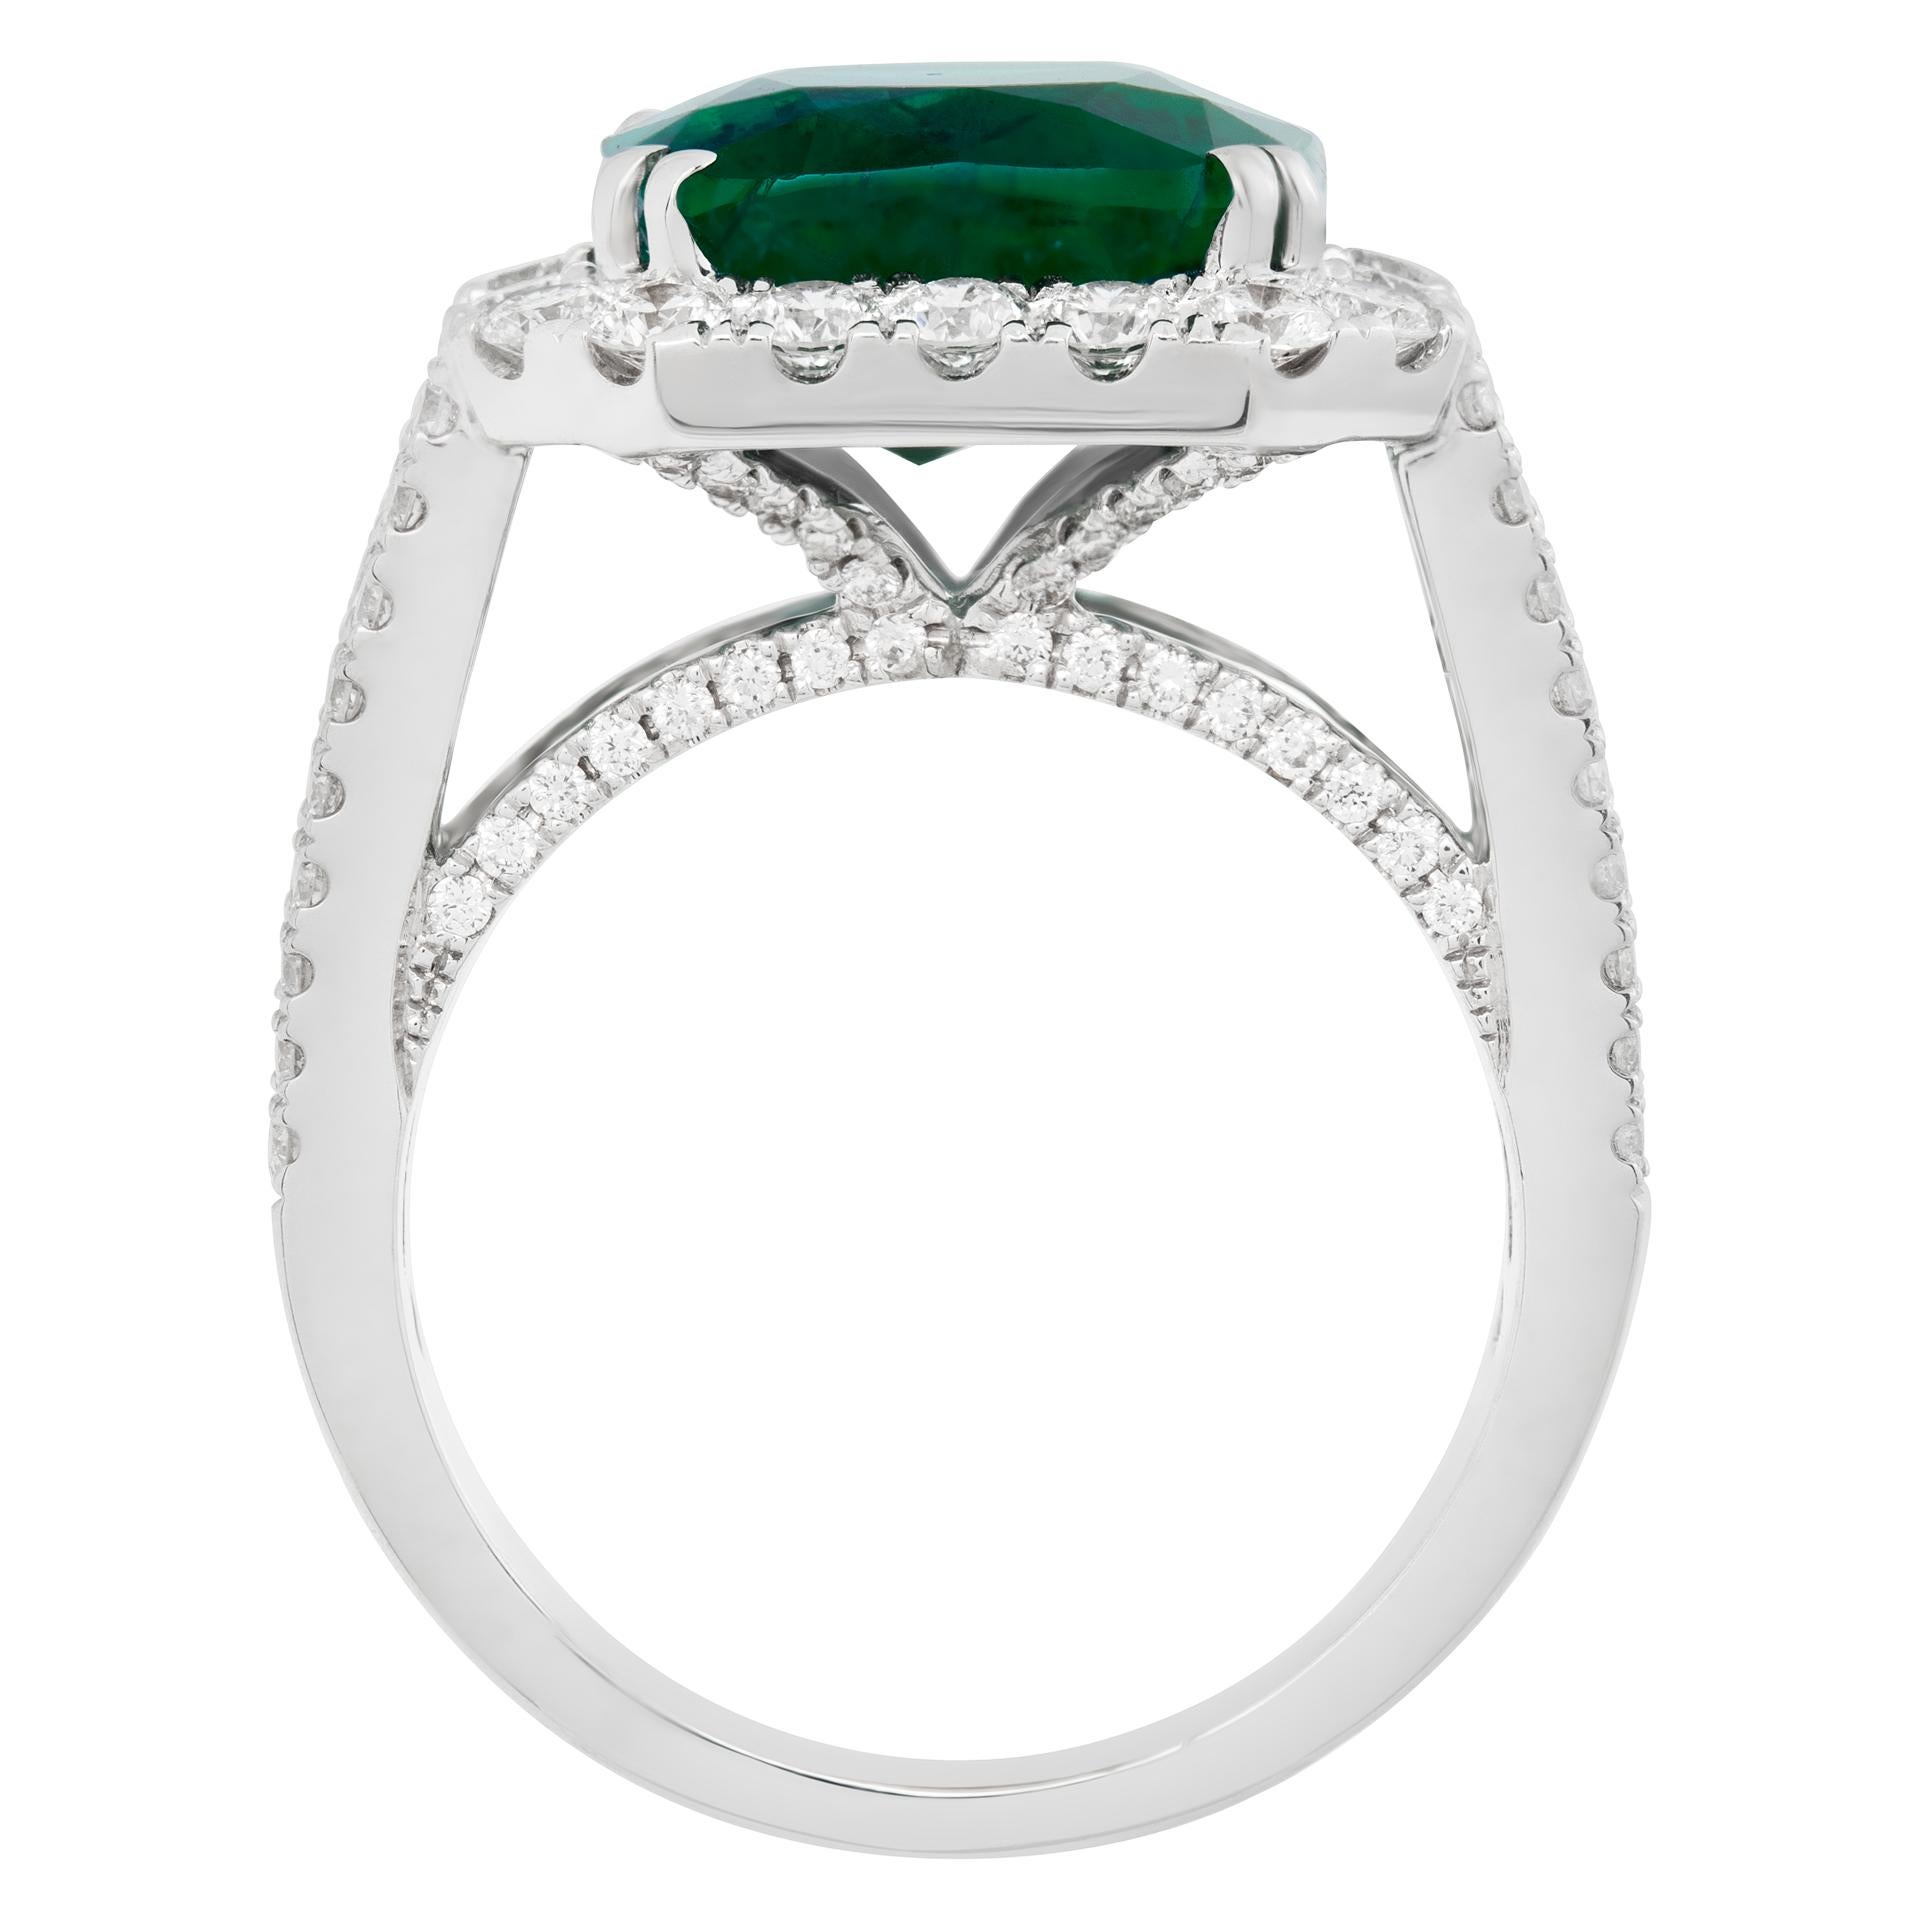 Women's AGL Certified Emerald ring with diamonds in white gold. For Sale